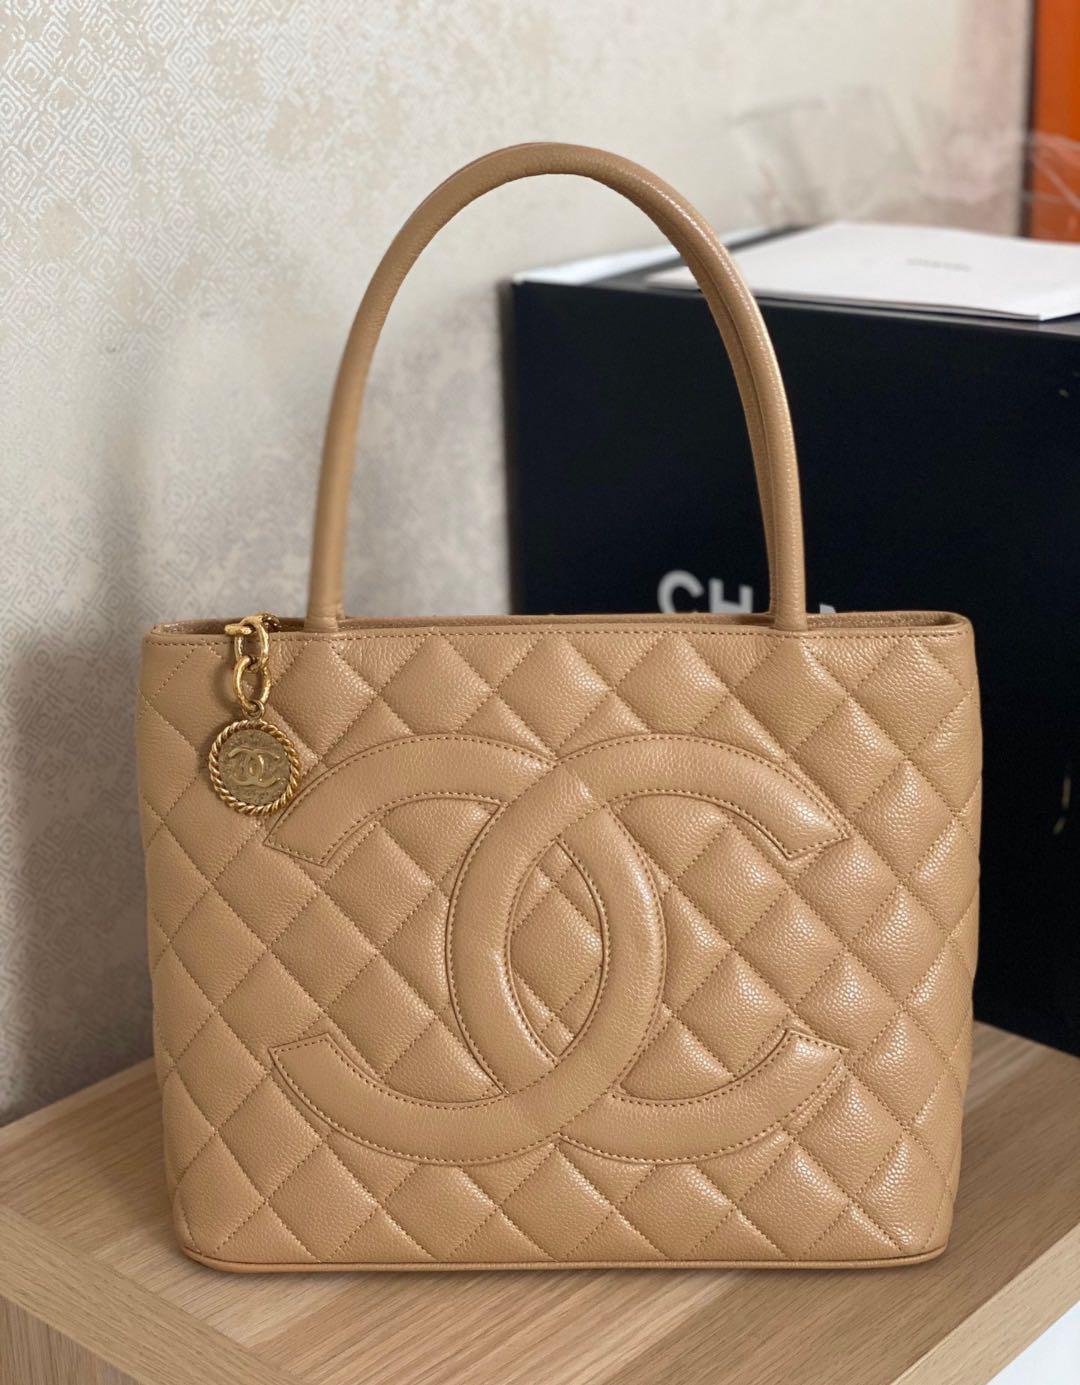 Chanel Medallion Bag Review 